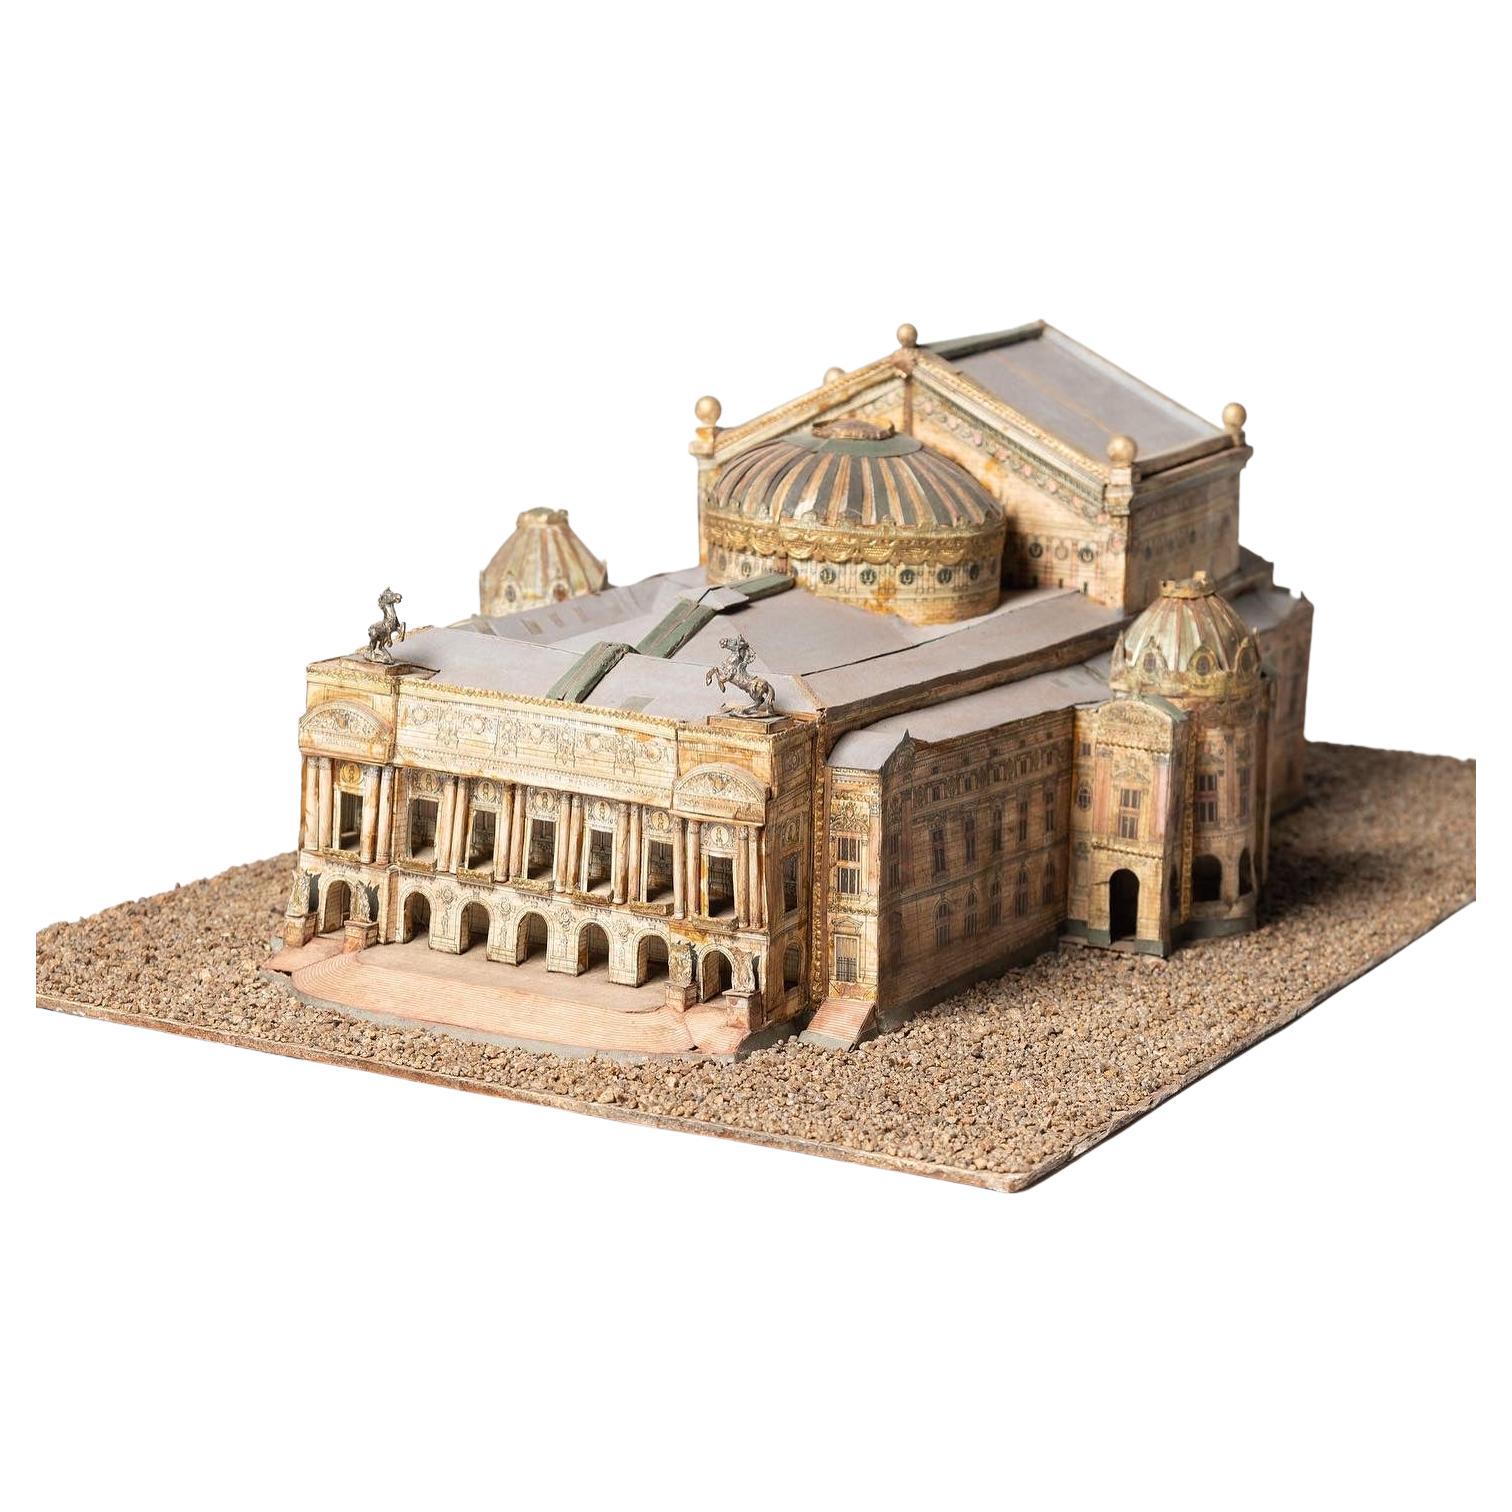 Antique model of the Paris Opera House, French, decorative model